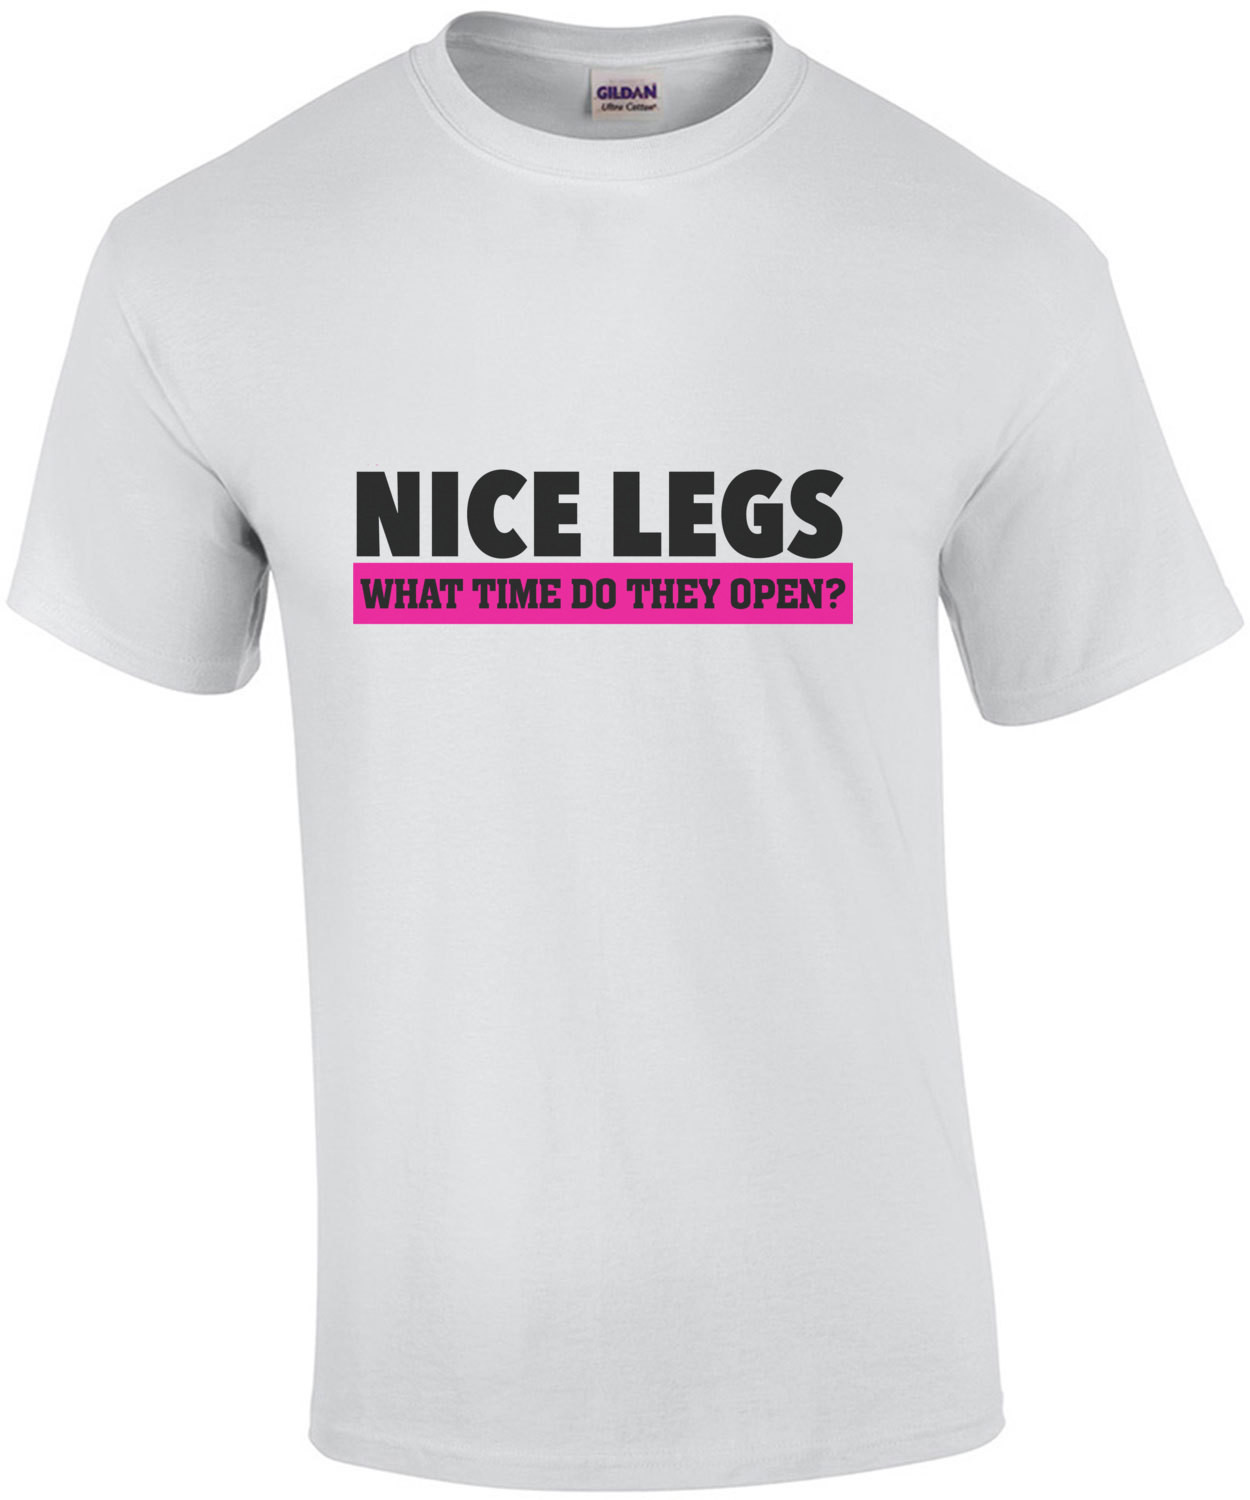 Nice legs - what time do they open? - sexual t-shirt